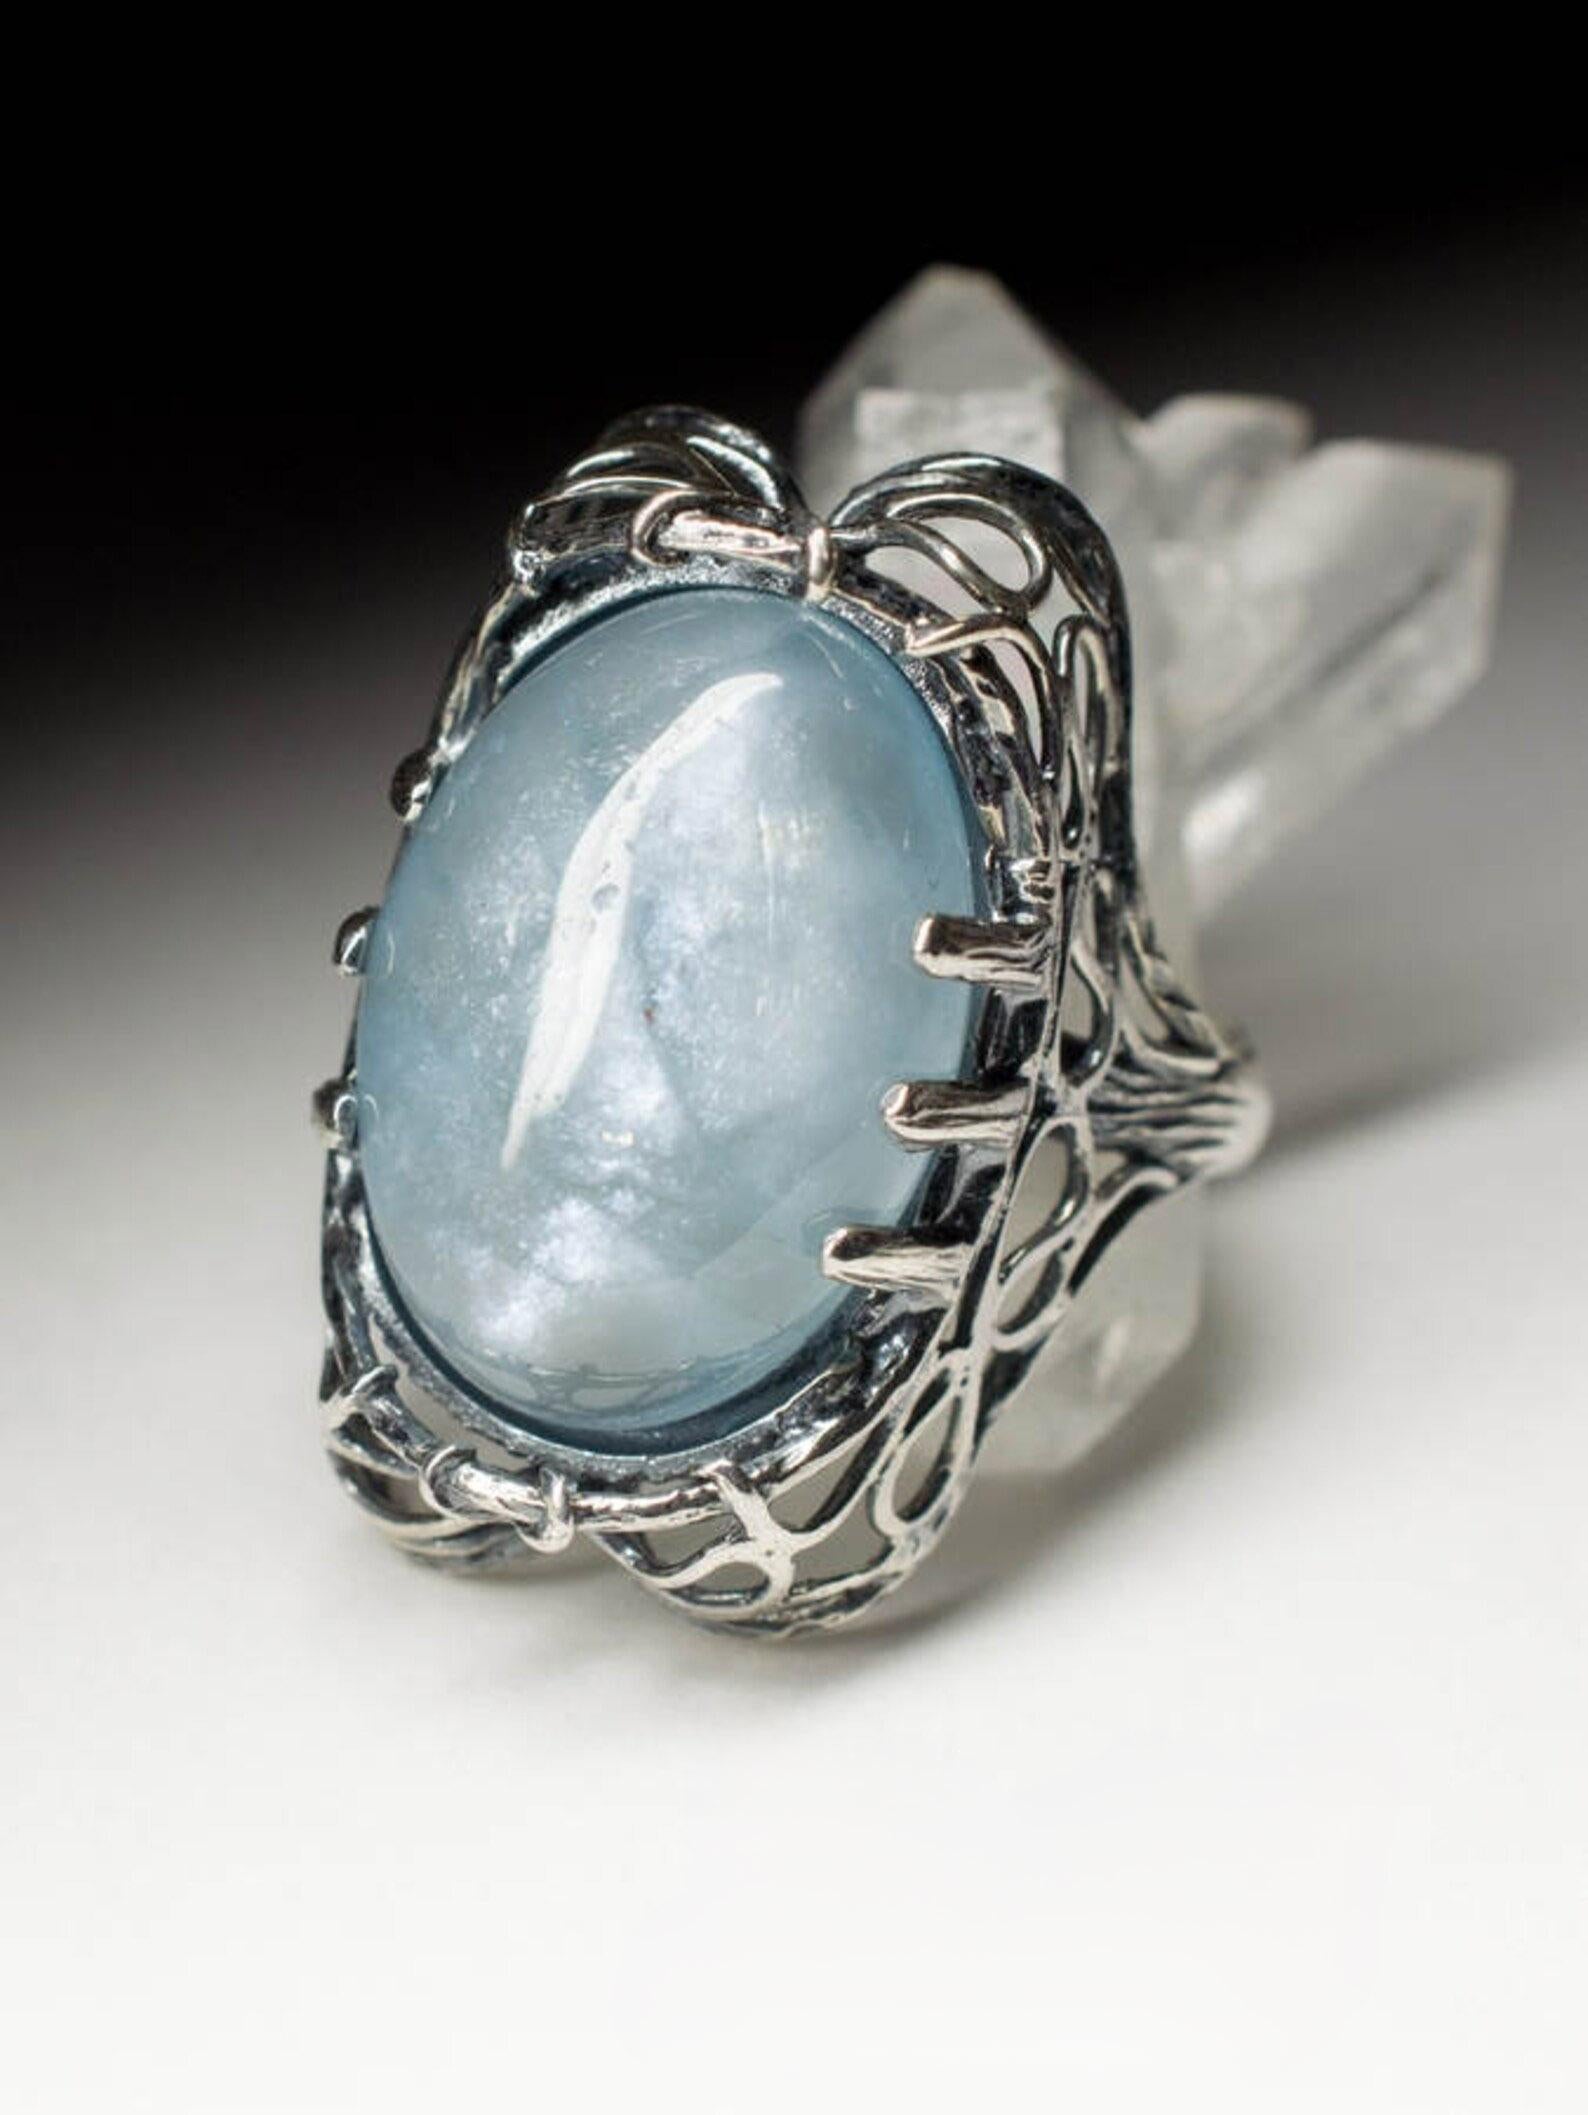 Blackened silver ring with natural cabochon cut Aquamarine
gemstone origin - China
weight of the ring - 7.62 grams
size of the ring - 7 US
stone measures - 0.28 x 0.47 x 0.67 in / 7 х 12 х 17 mm